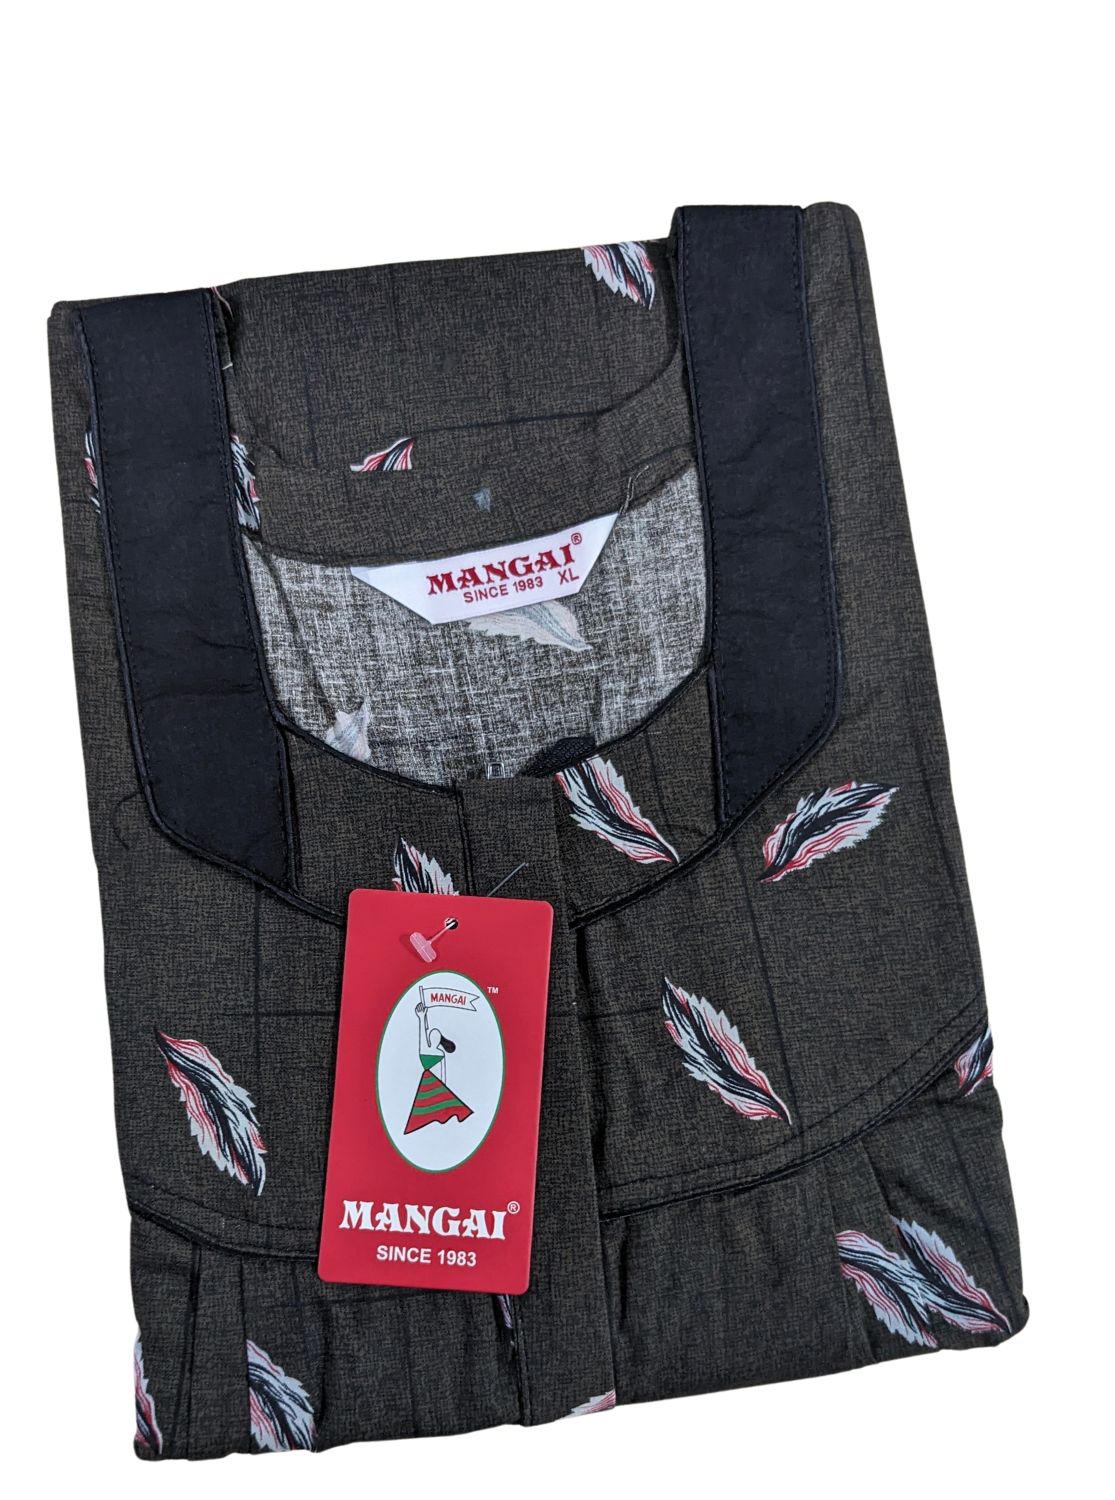 MANGAI Premium Cotton Printed FEEDING NIGHTY| Soft Cotton | Above Knee Length Covered | Front Open Zipper| Vertical Feeding Zipper | Feeding Nighties